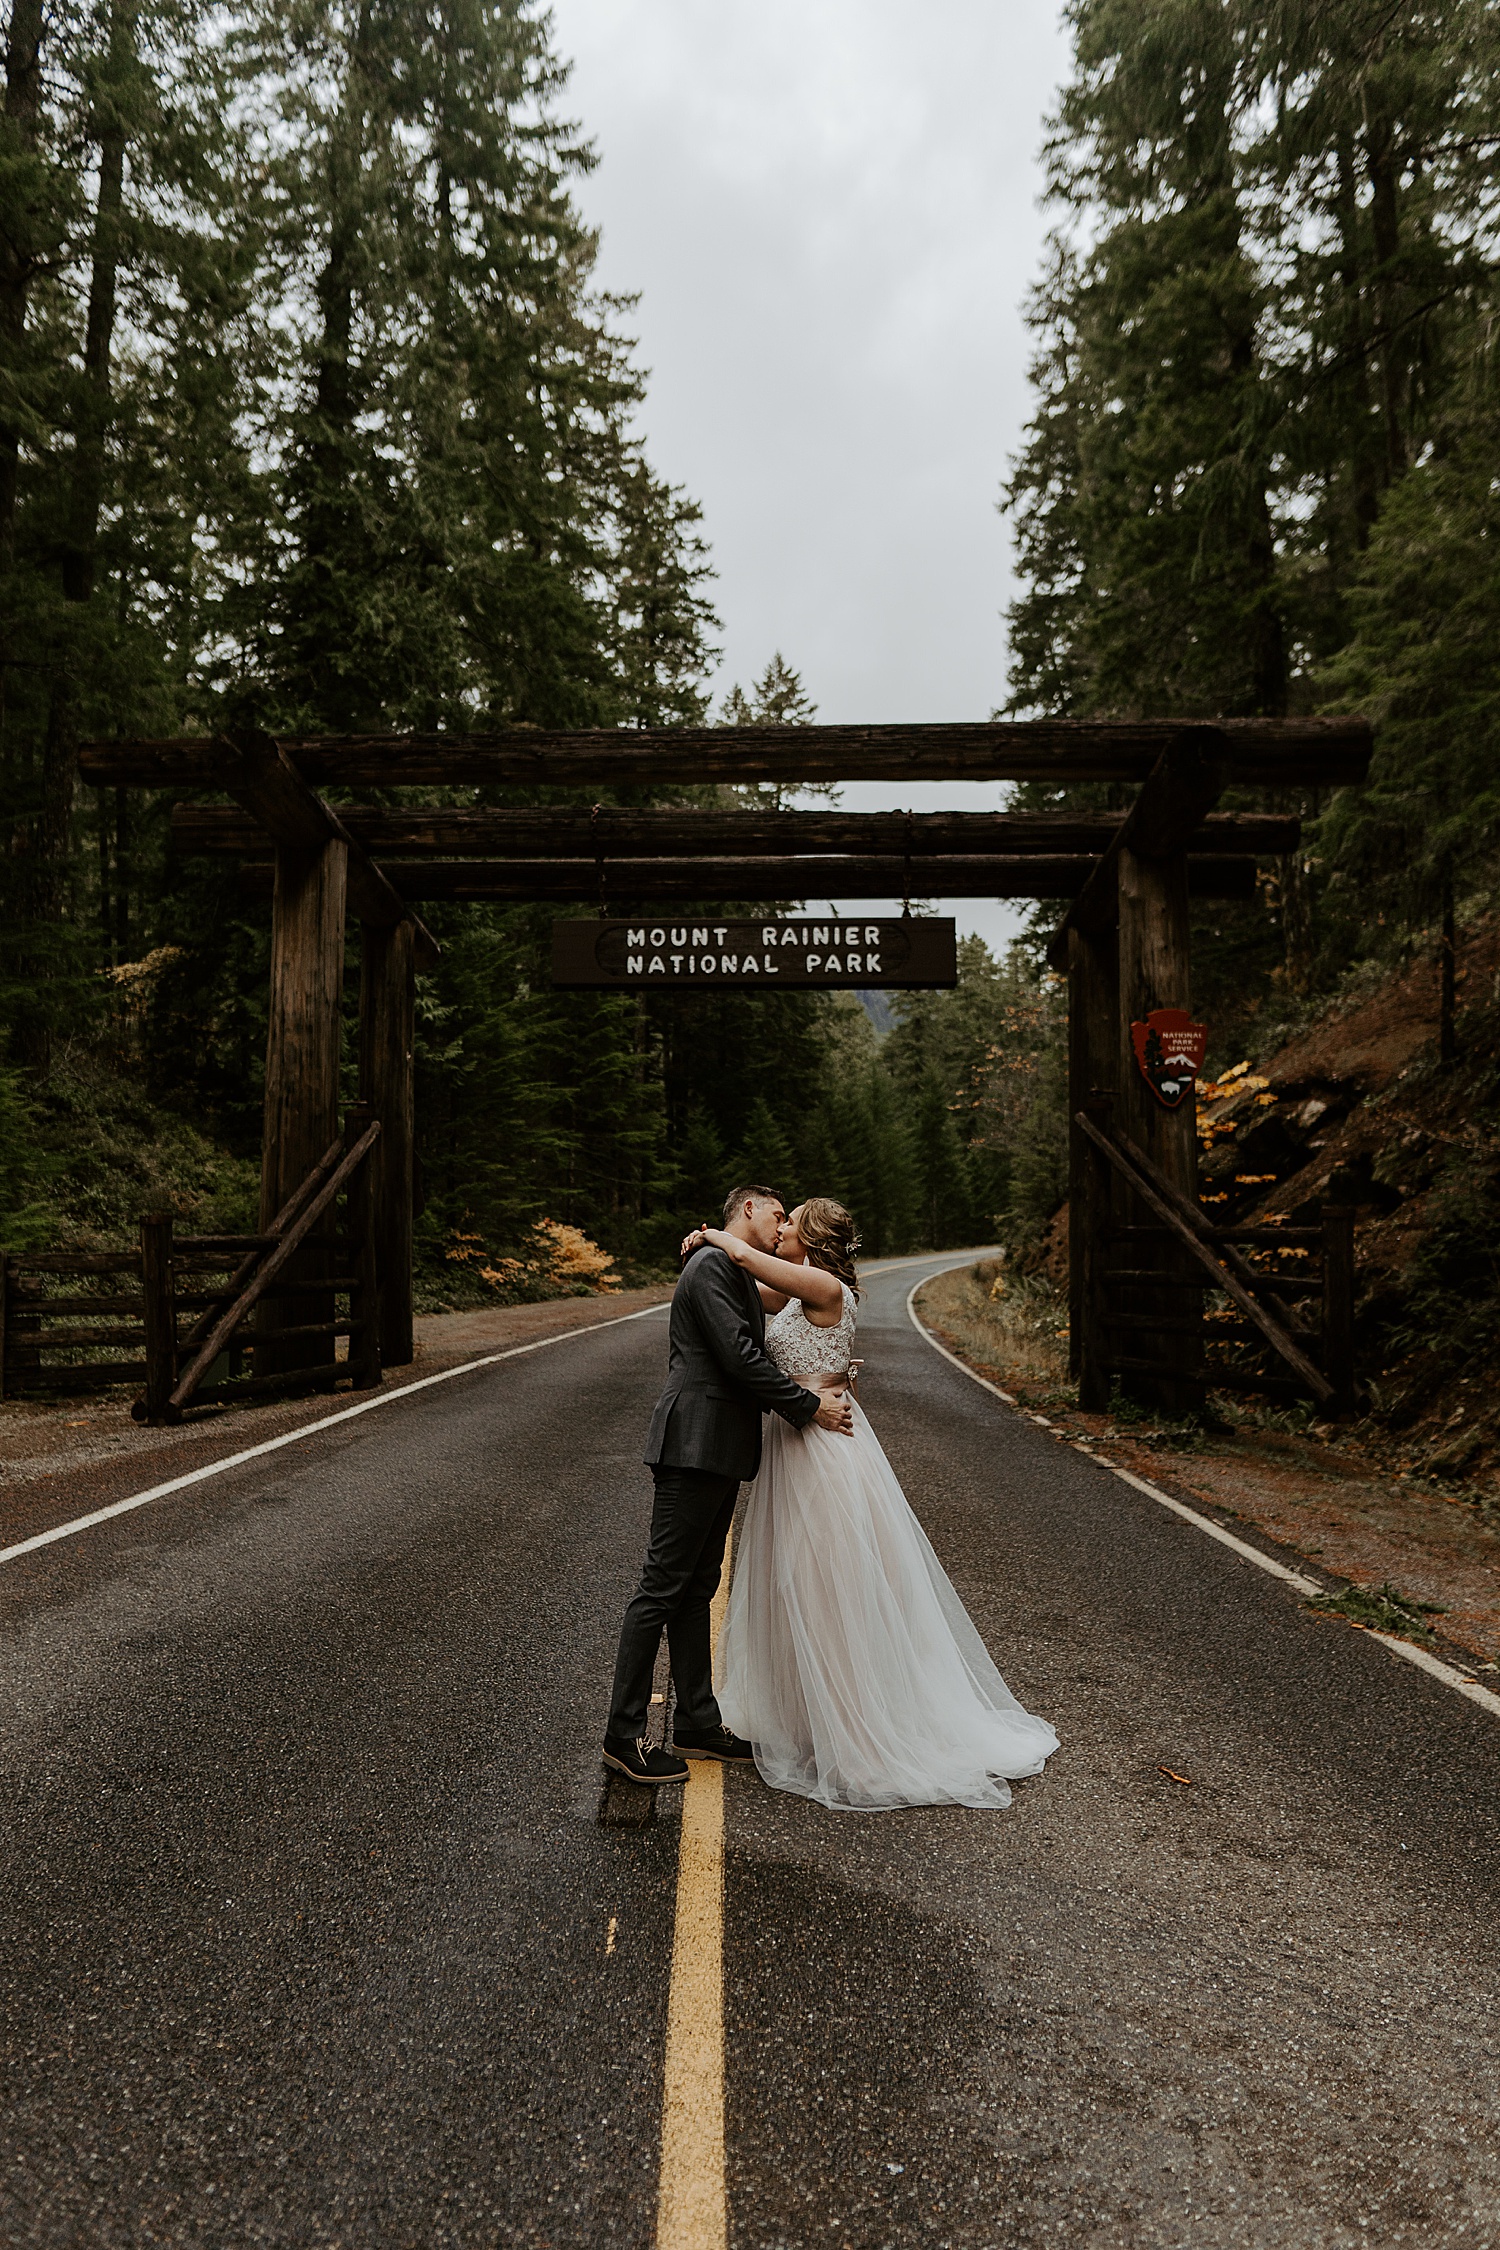 Newly married couple kissing in front of the Mount Rainier National Park sign